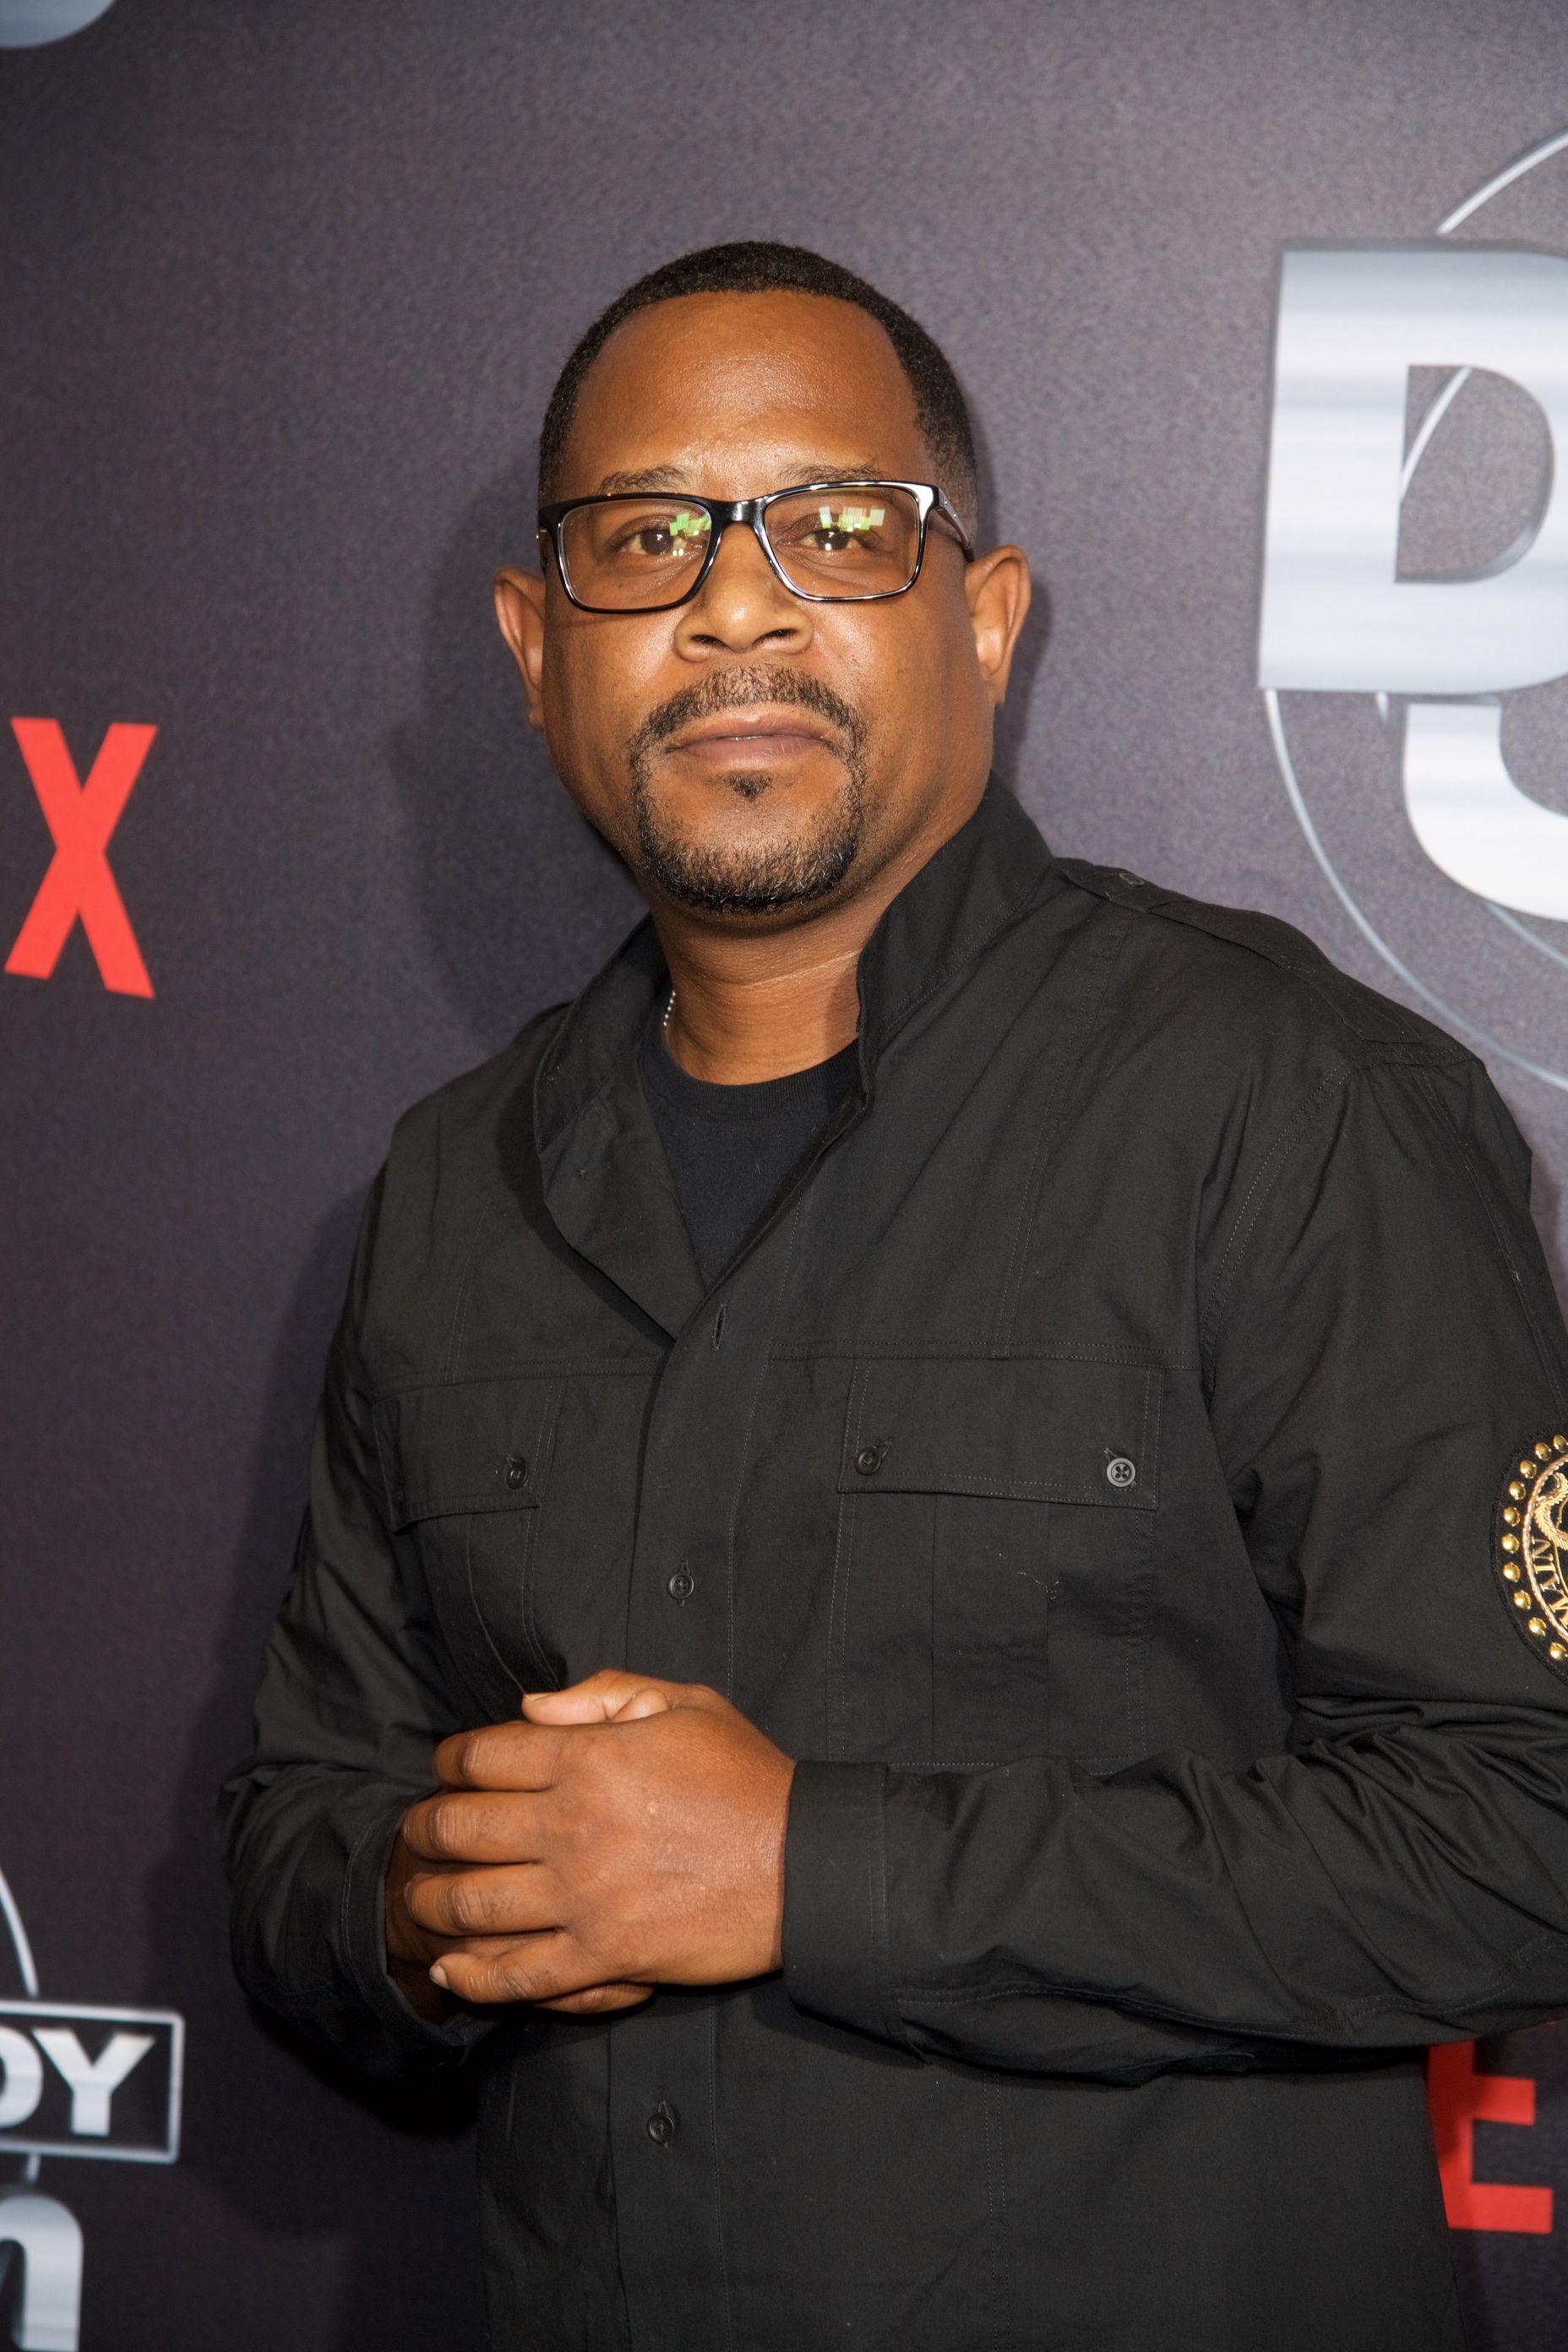 Comedy actor Martin Lawrence at Netflix Presents Russell Simmons' "Def Comedy Jam 25" Special Event at The Beverly Hilton Hotel on September 10, 2017 | Photo: Getty Images